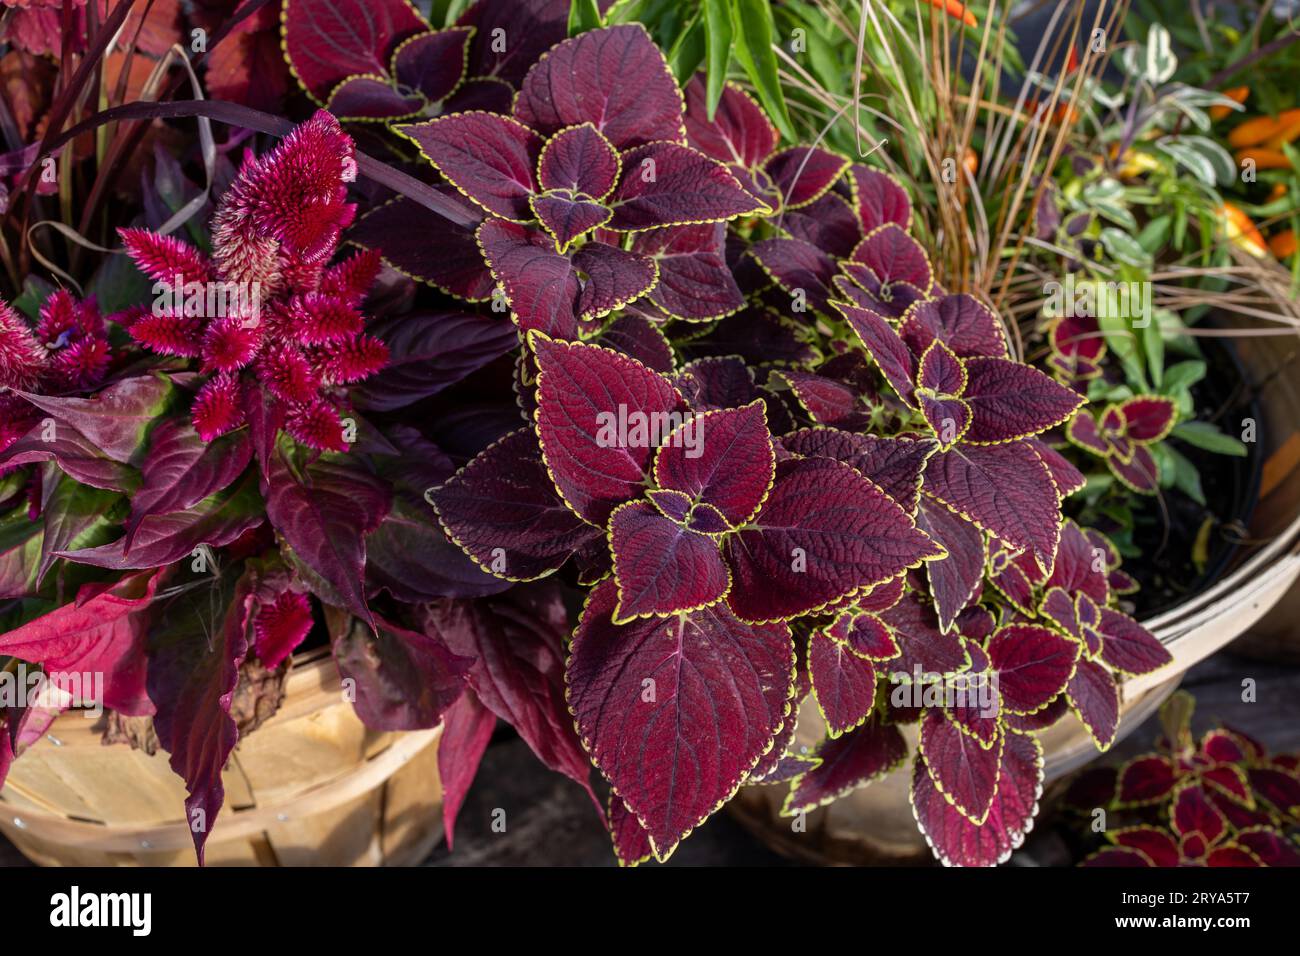 Full frame abstract texture background of purple leaves on a sunny outdoor potted velvety red coleus plant Stock Photo